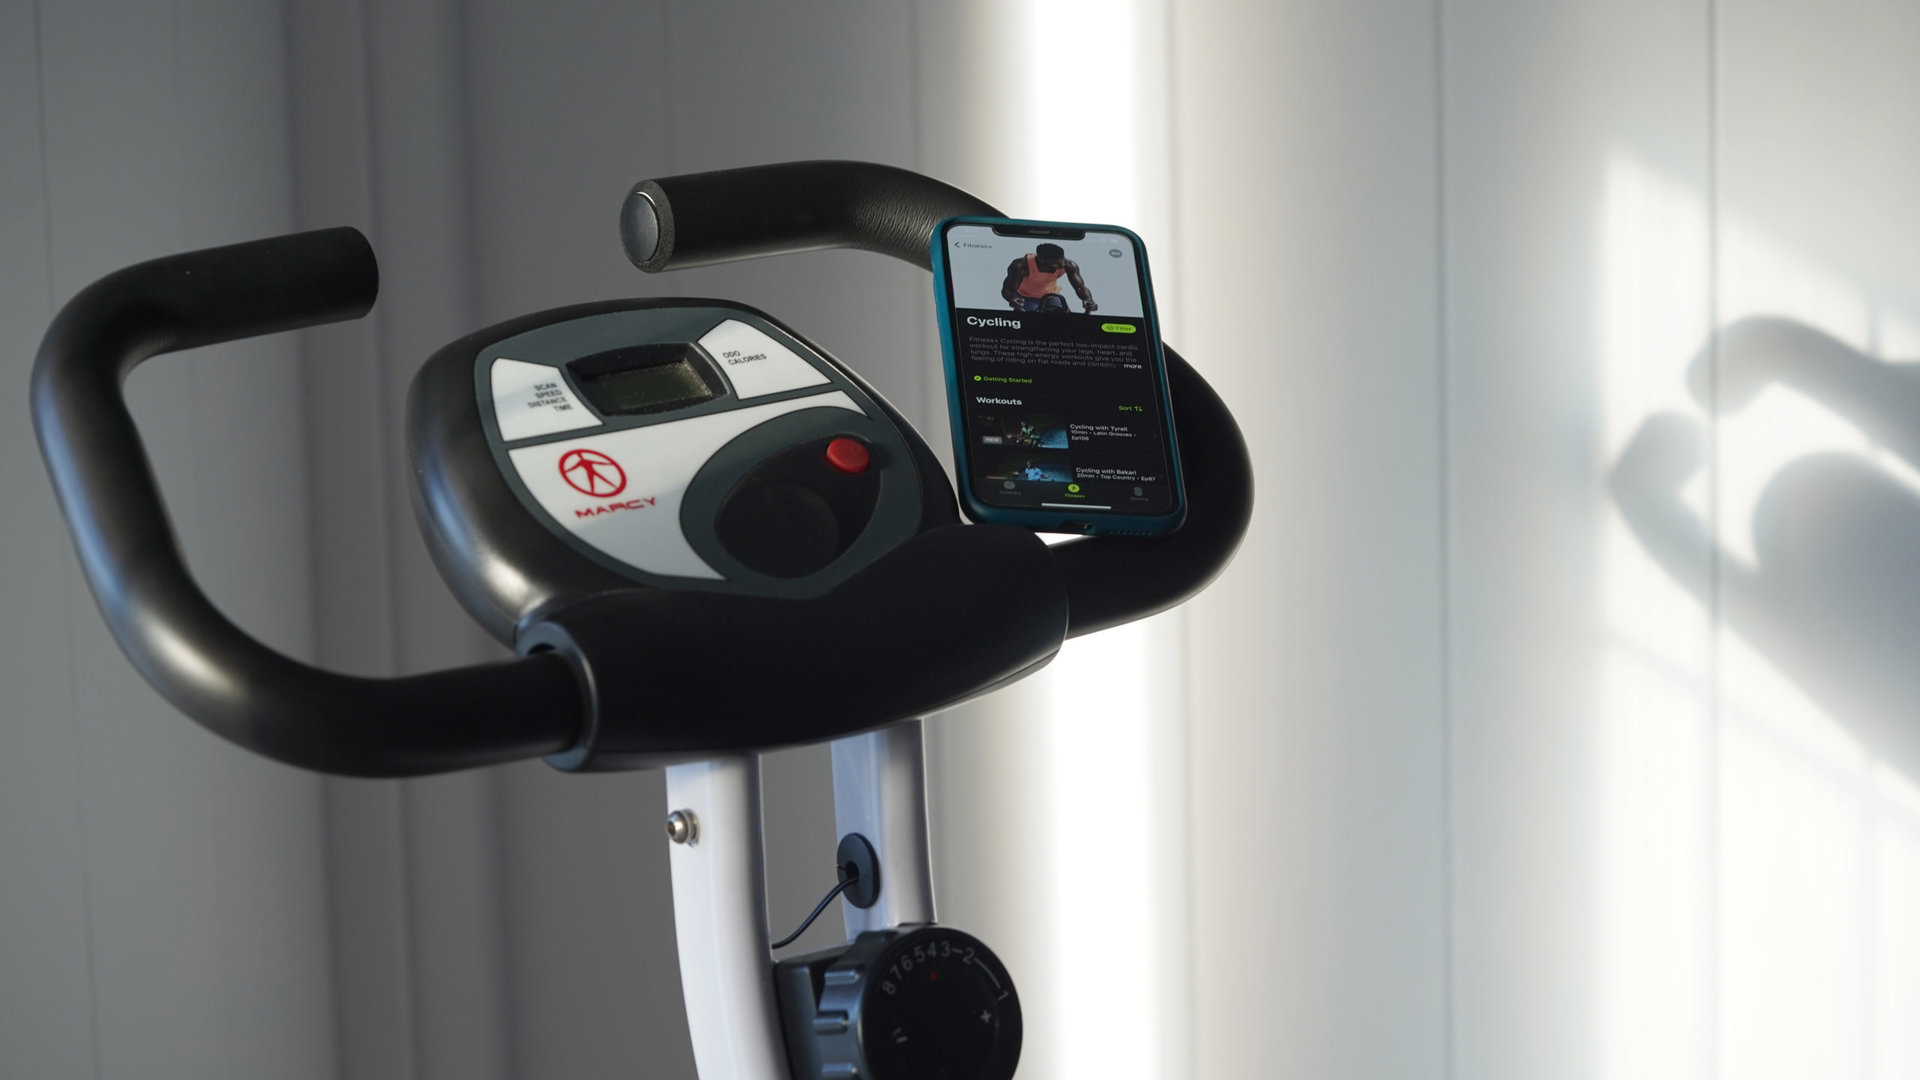 An iPhone resting on a stationary bike handle displays the app's Cycling menu.